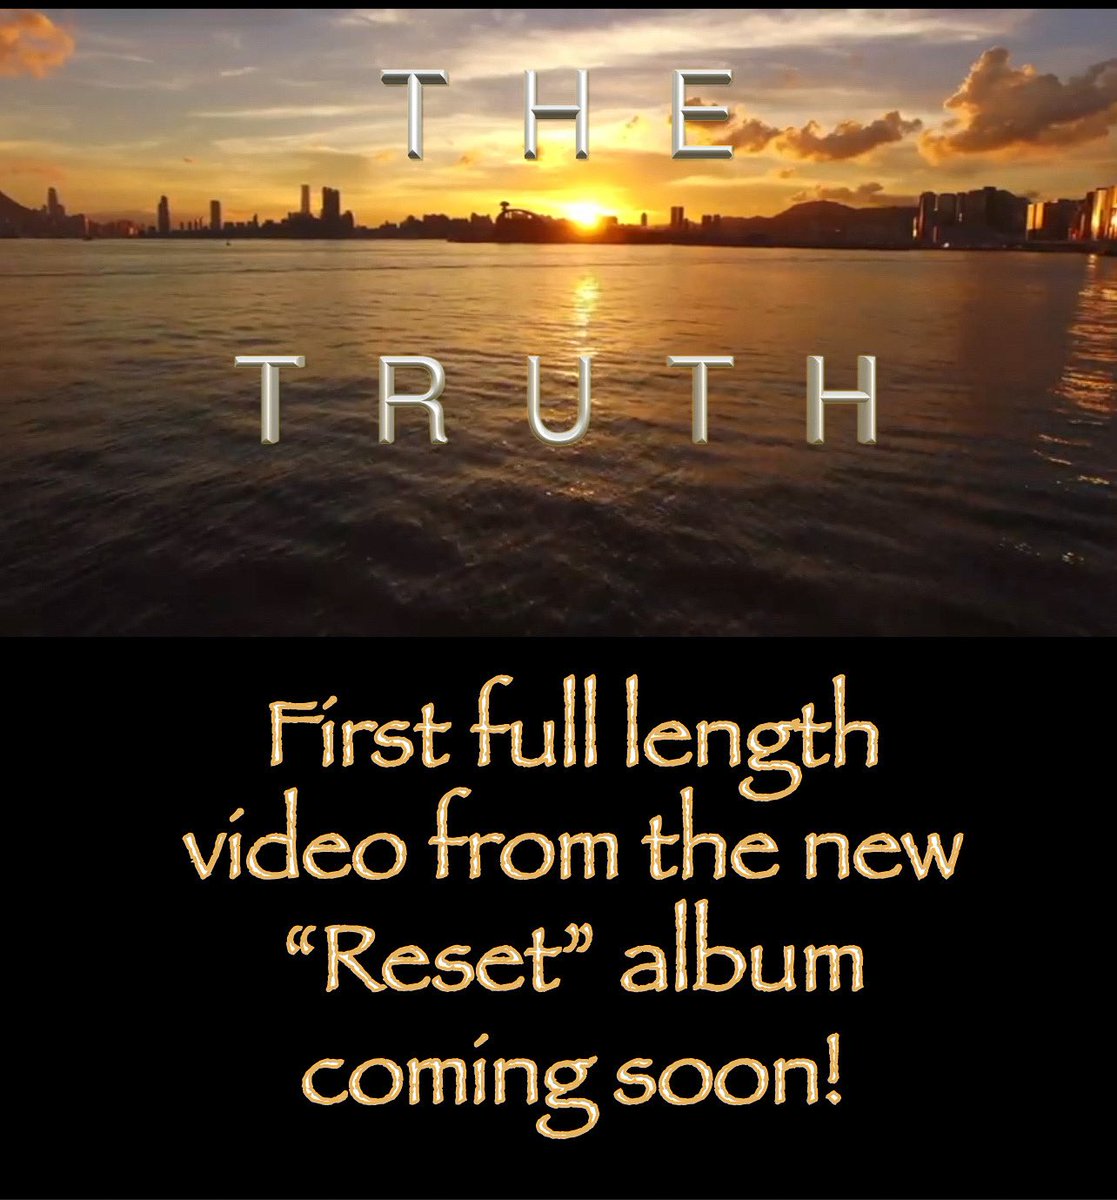 The first full length video for the new album, “Reset” is coming soon.  Stay tuned!  Click here to order the album: bit.ly/3V2szwU.  #🎸 #🎶#mikecampese #newalbum #reset #thetruth #musicvideo